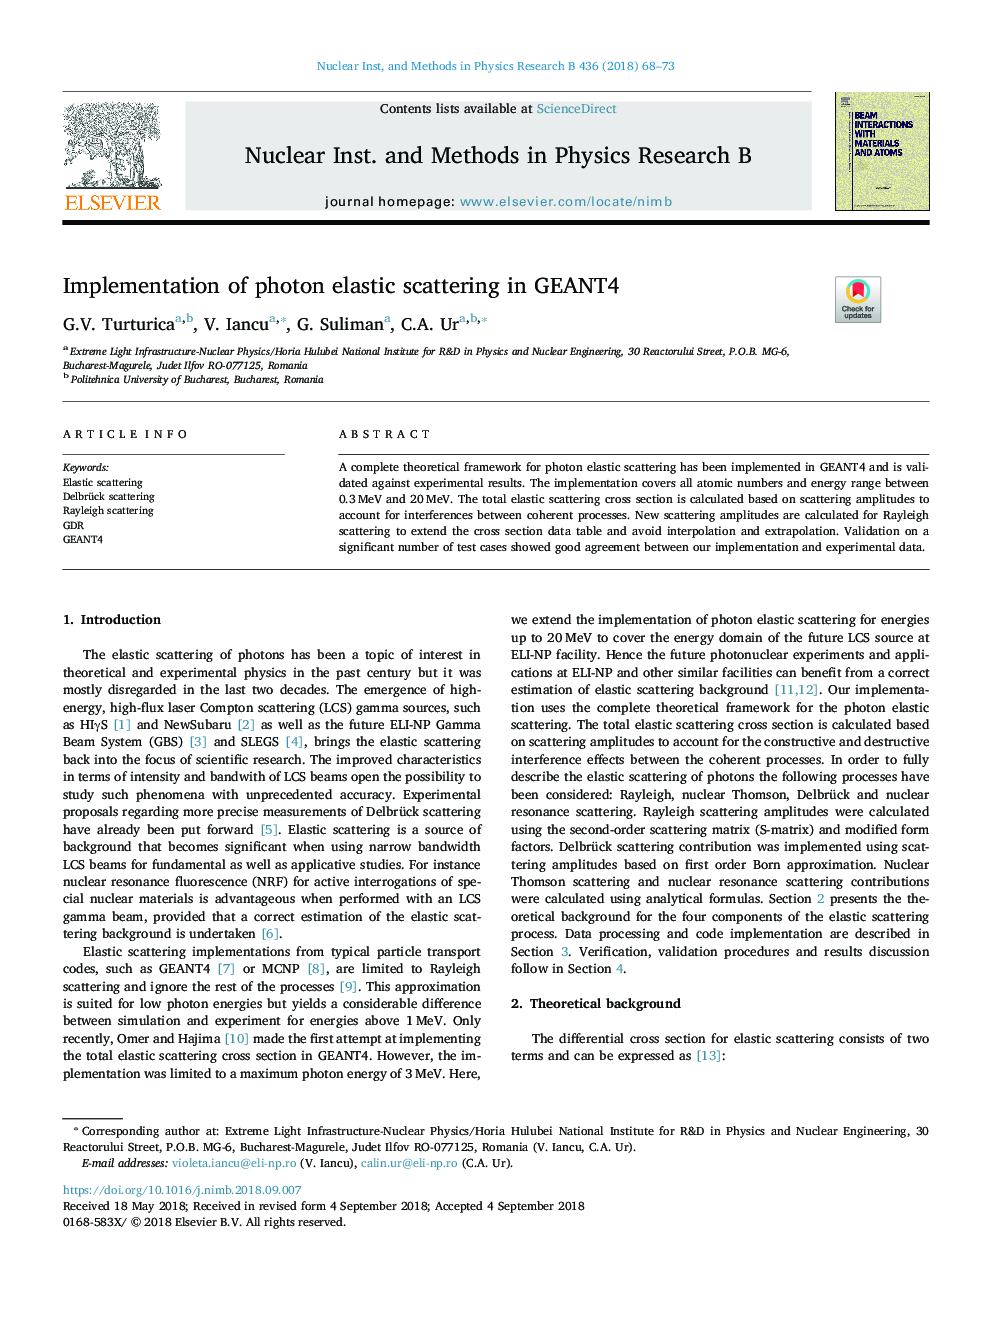 Implementation of photon elastic scattering in GEANT4